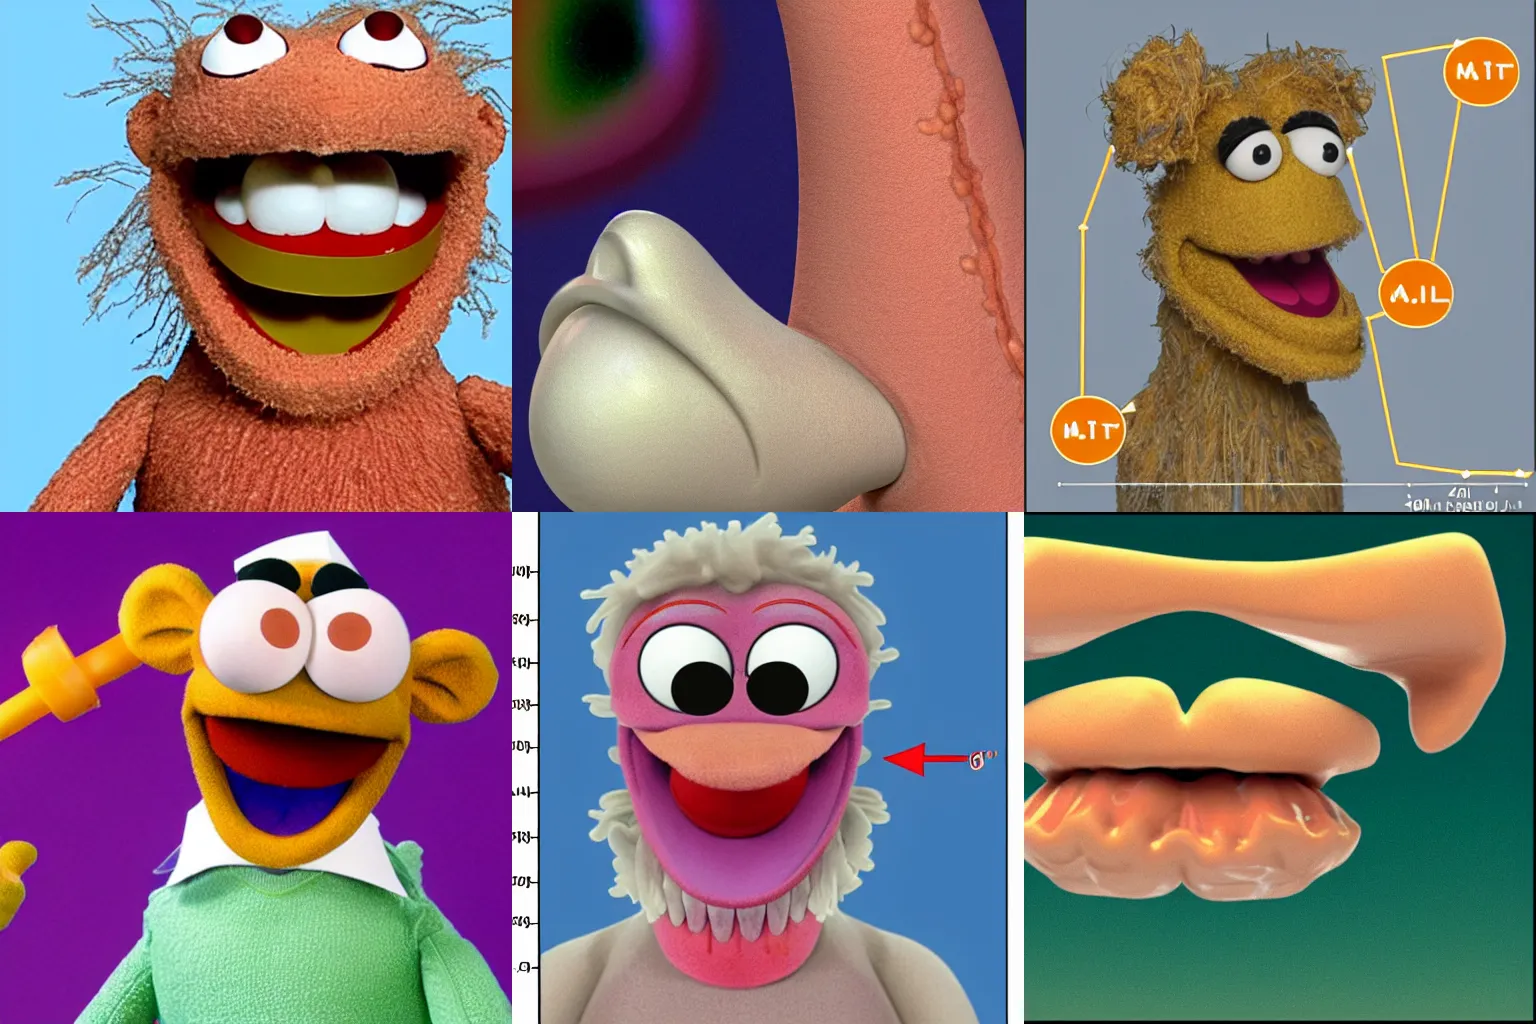 Prompt: FIGURE 6.9.1 Mid-sagittal oral vocal tract showing major areas of articulation in Beaker (Muppet)'s oral vocal tract